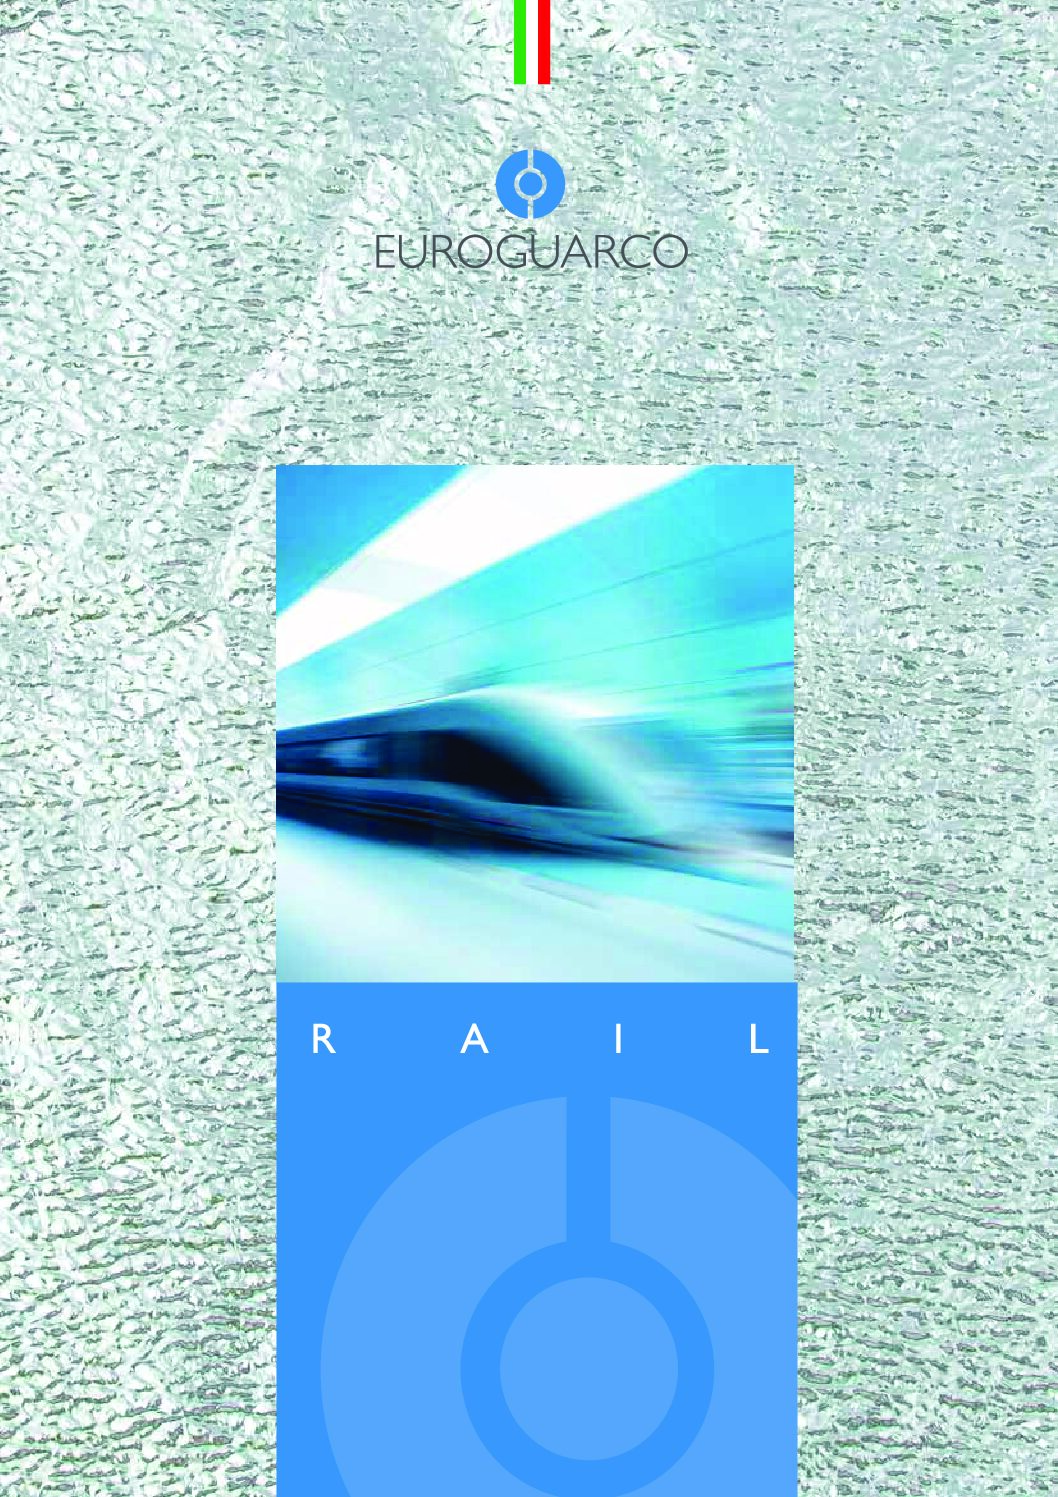 Euroguarco Group’s Products for Rail